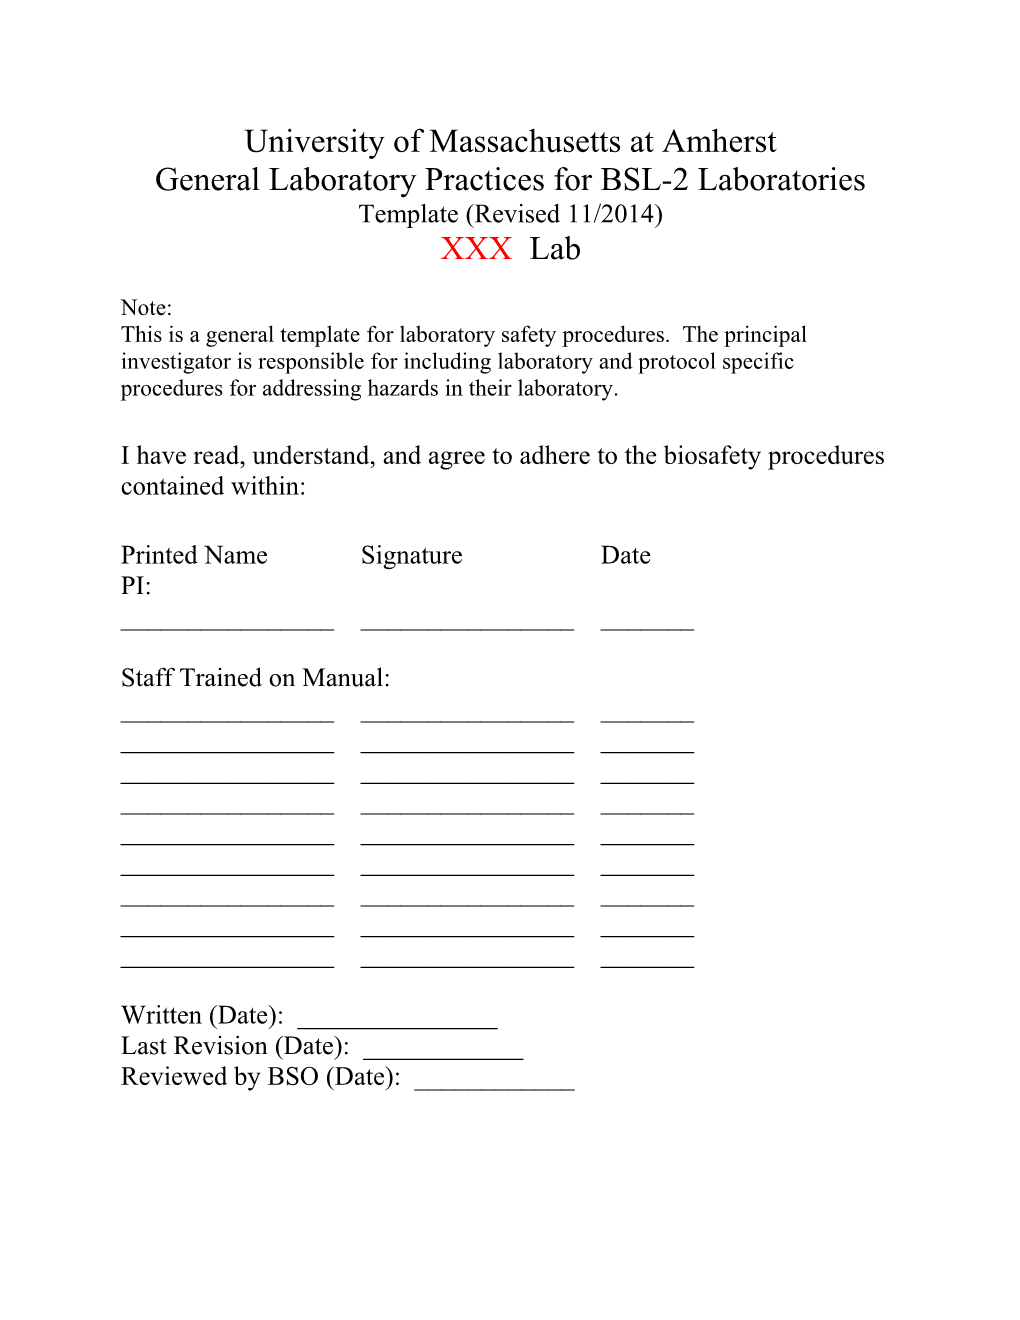 General Laboratory Practices for BSL-2 Laboratories